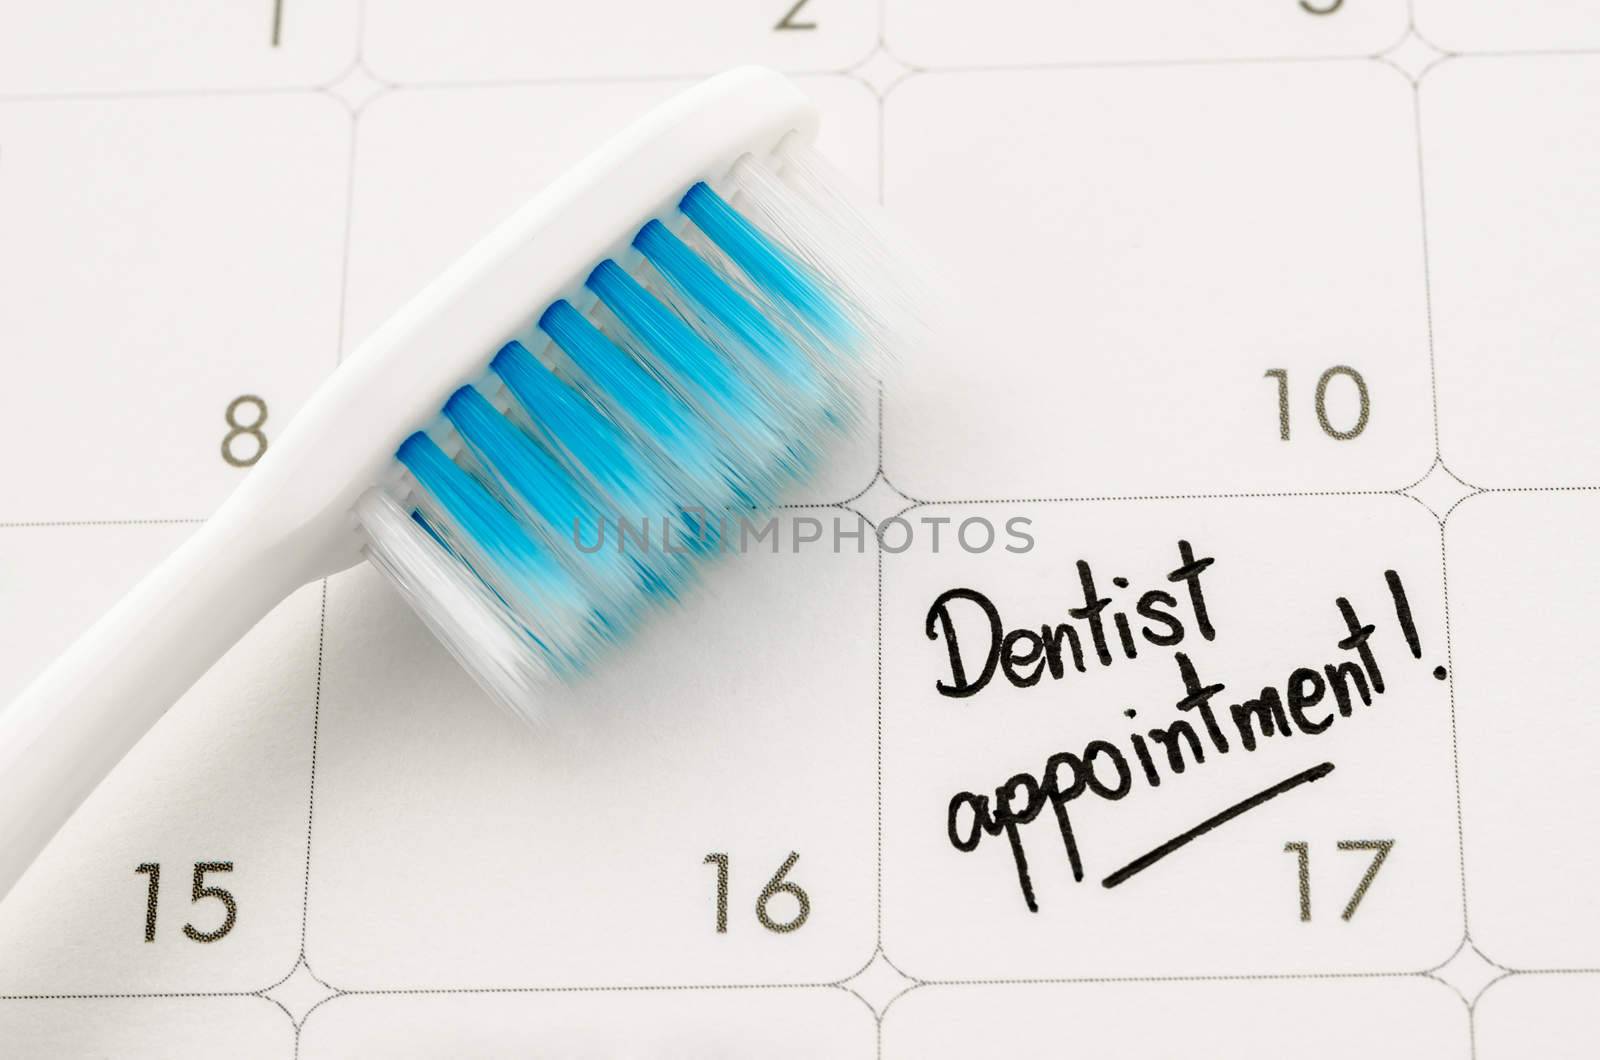 Reminder "Dentist appointment" in calendar. by Gamjai